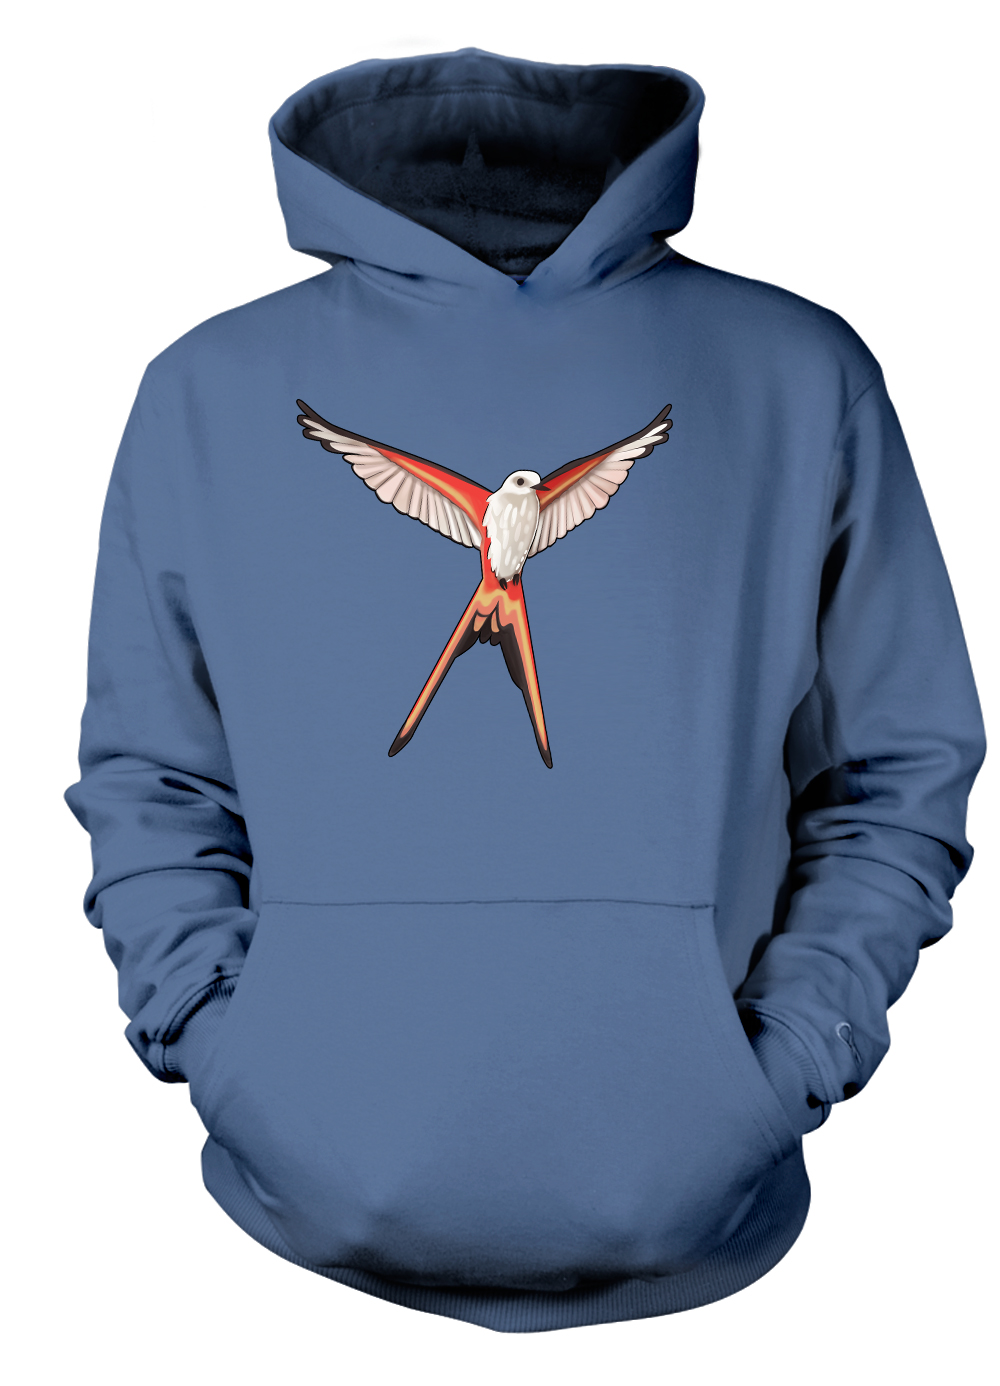 Full-Color Wingspan Hoodie (Large Logo) - Scissor-Tailed Flycatcher (Indigo Blue Pullover Hoodie)